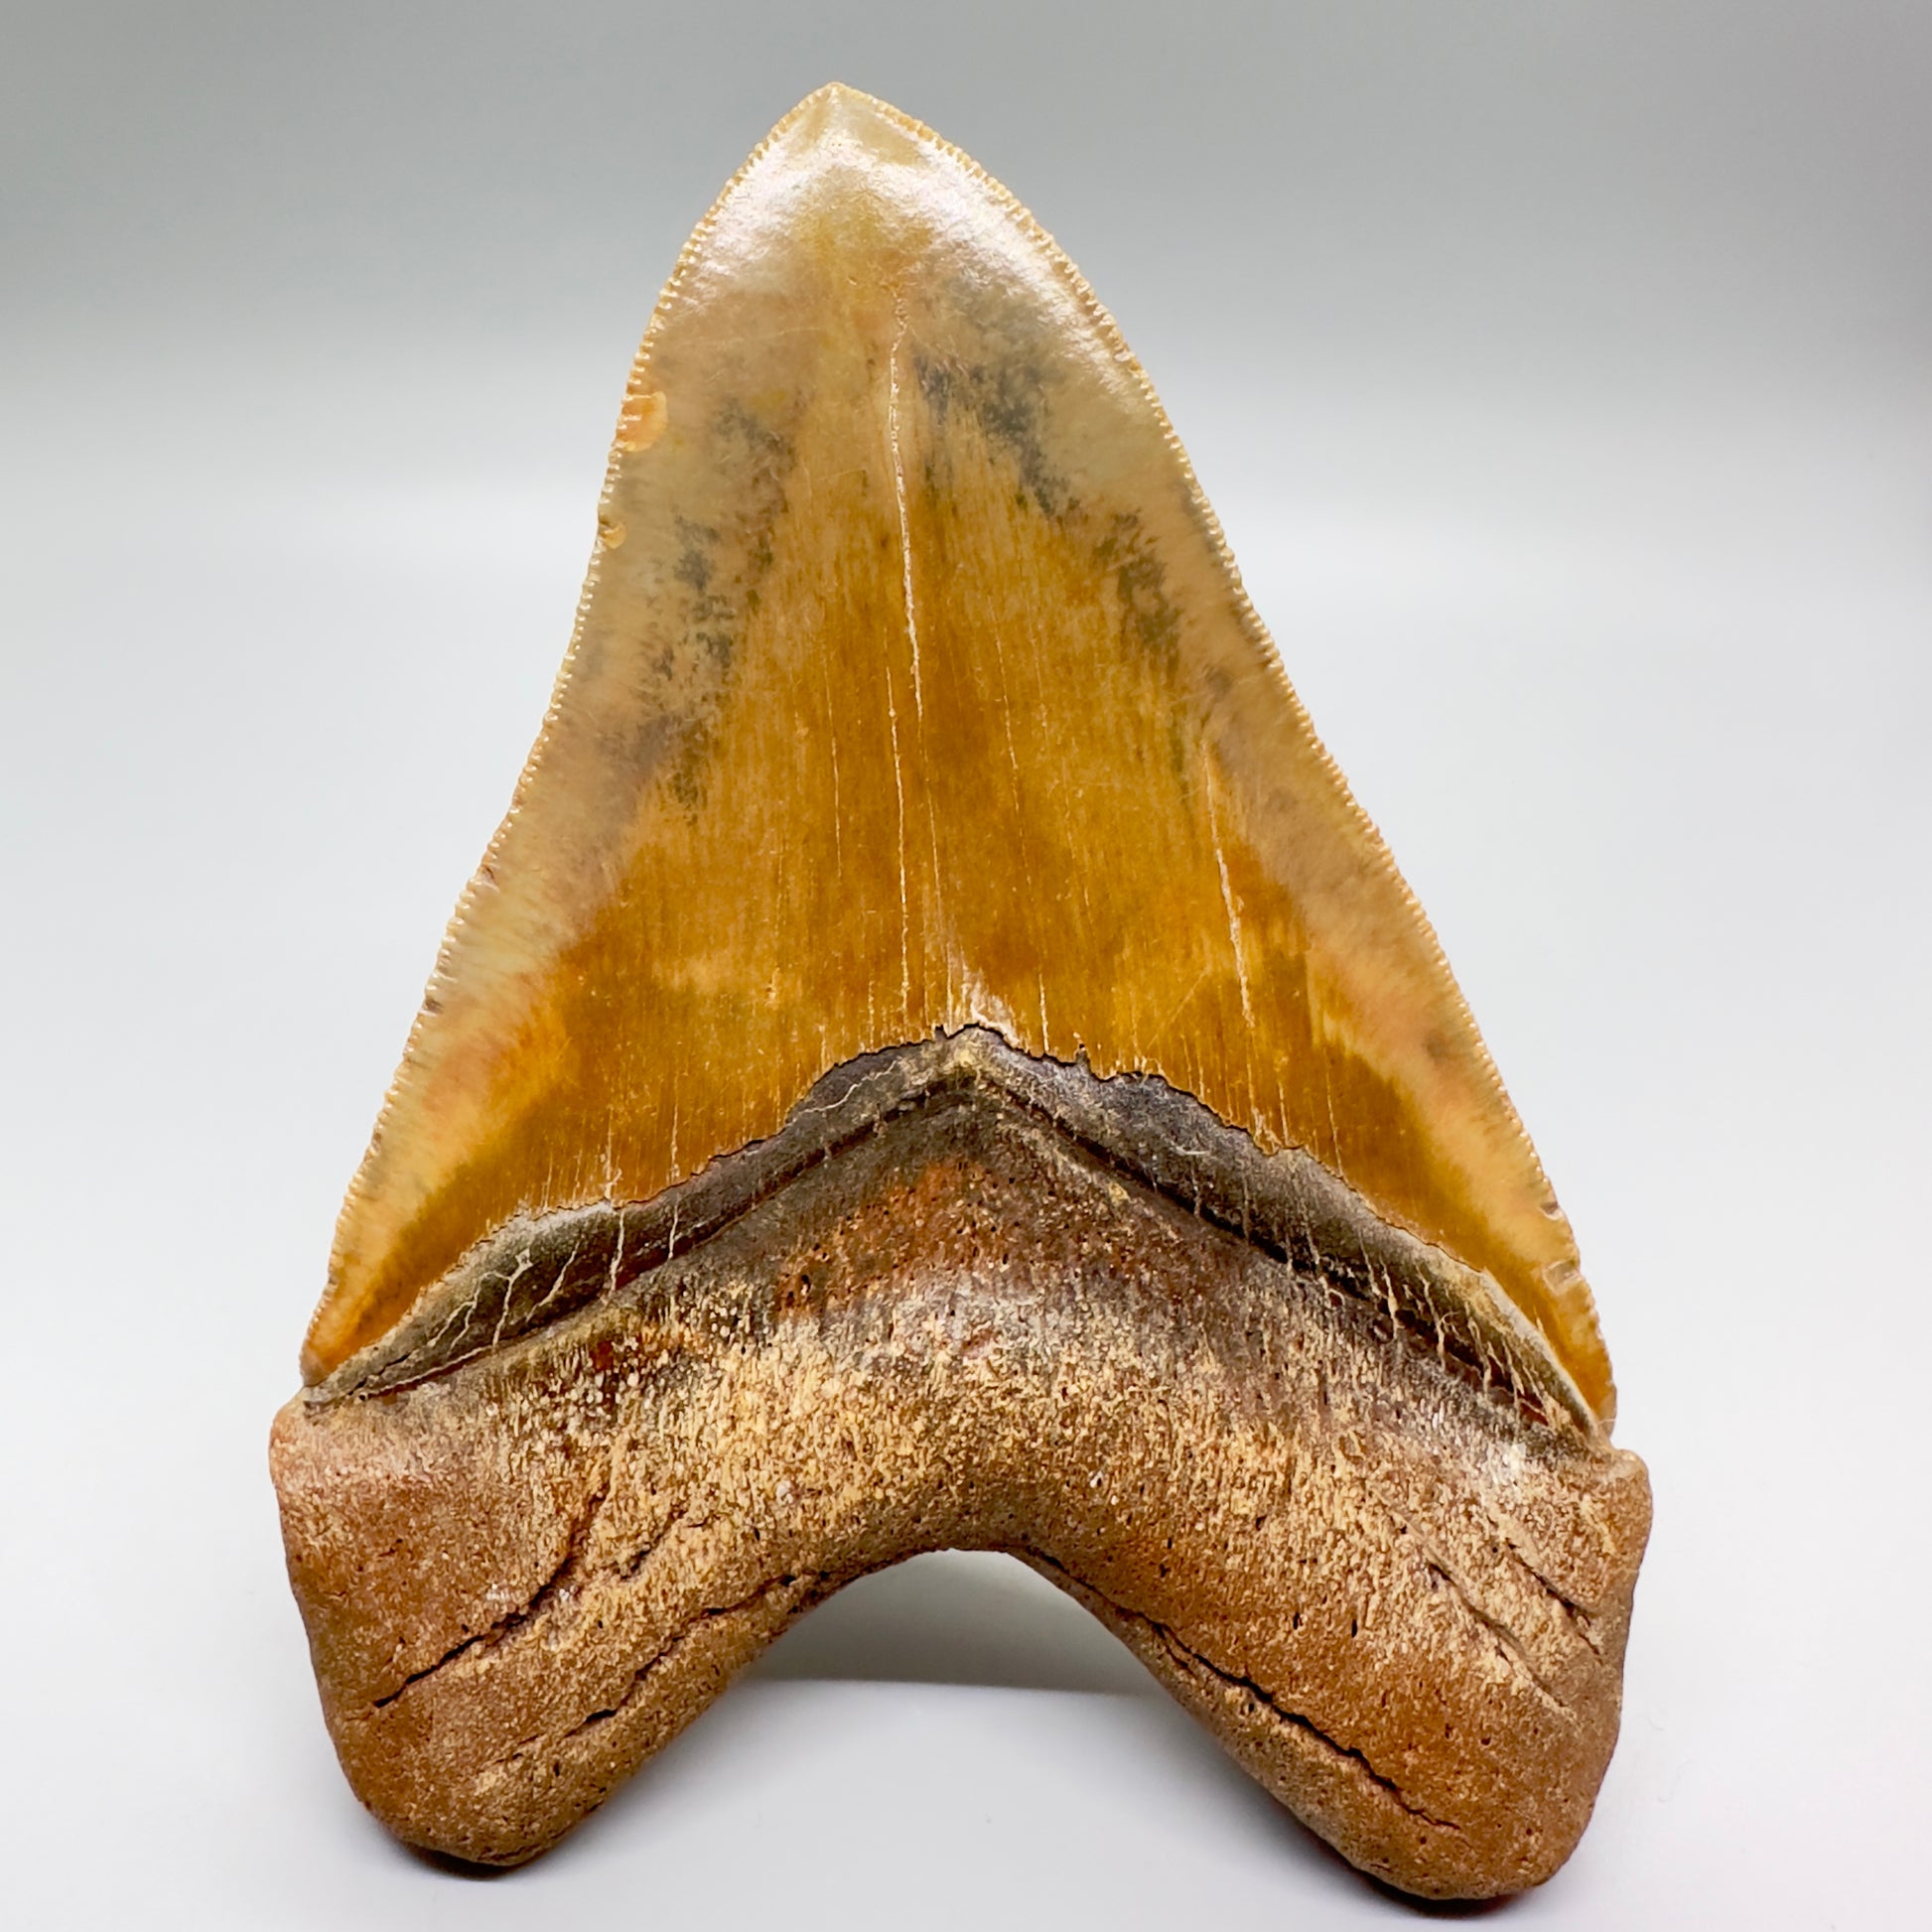 sharply serrated green and gold colors 5.39" long Fossil Megalodon Tooth from North Carolina CM4573 - Back